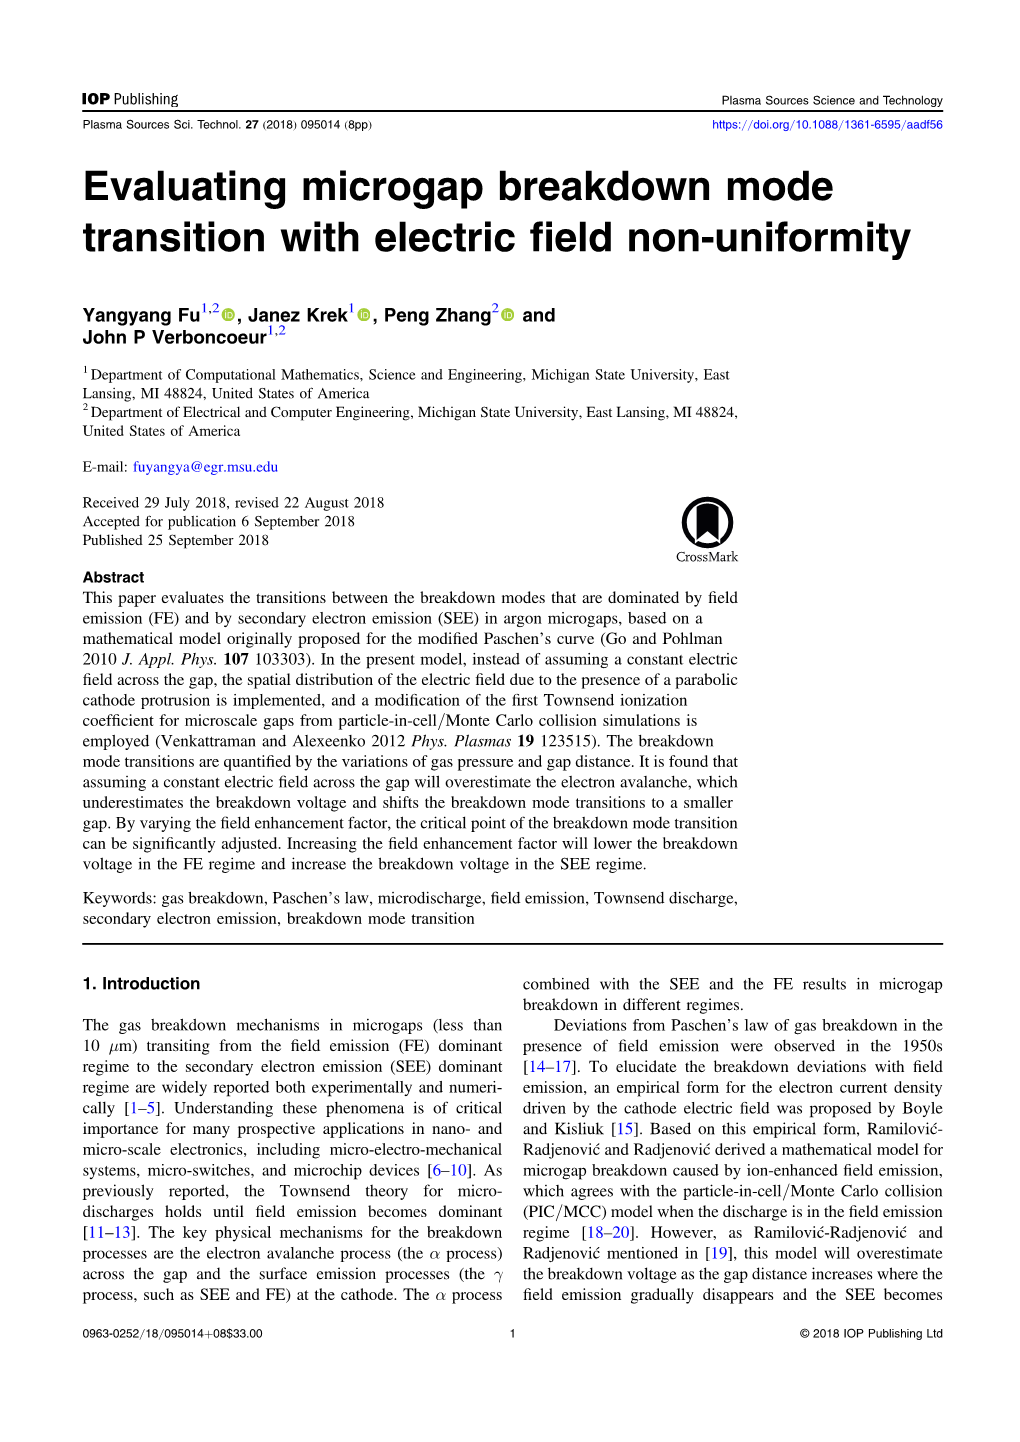 Evaluating Microgap Breakdown Mode Transition with Electric Field